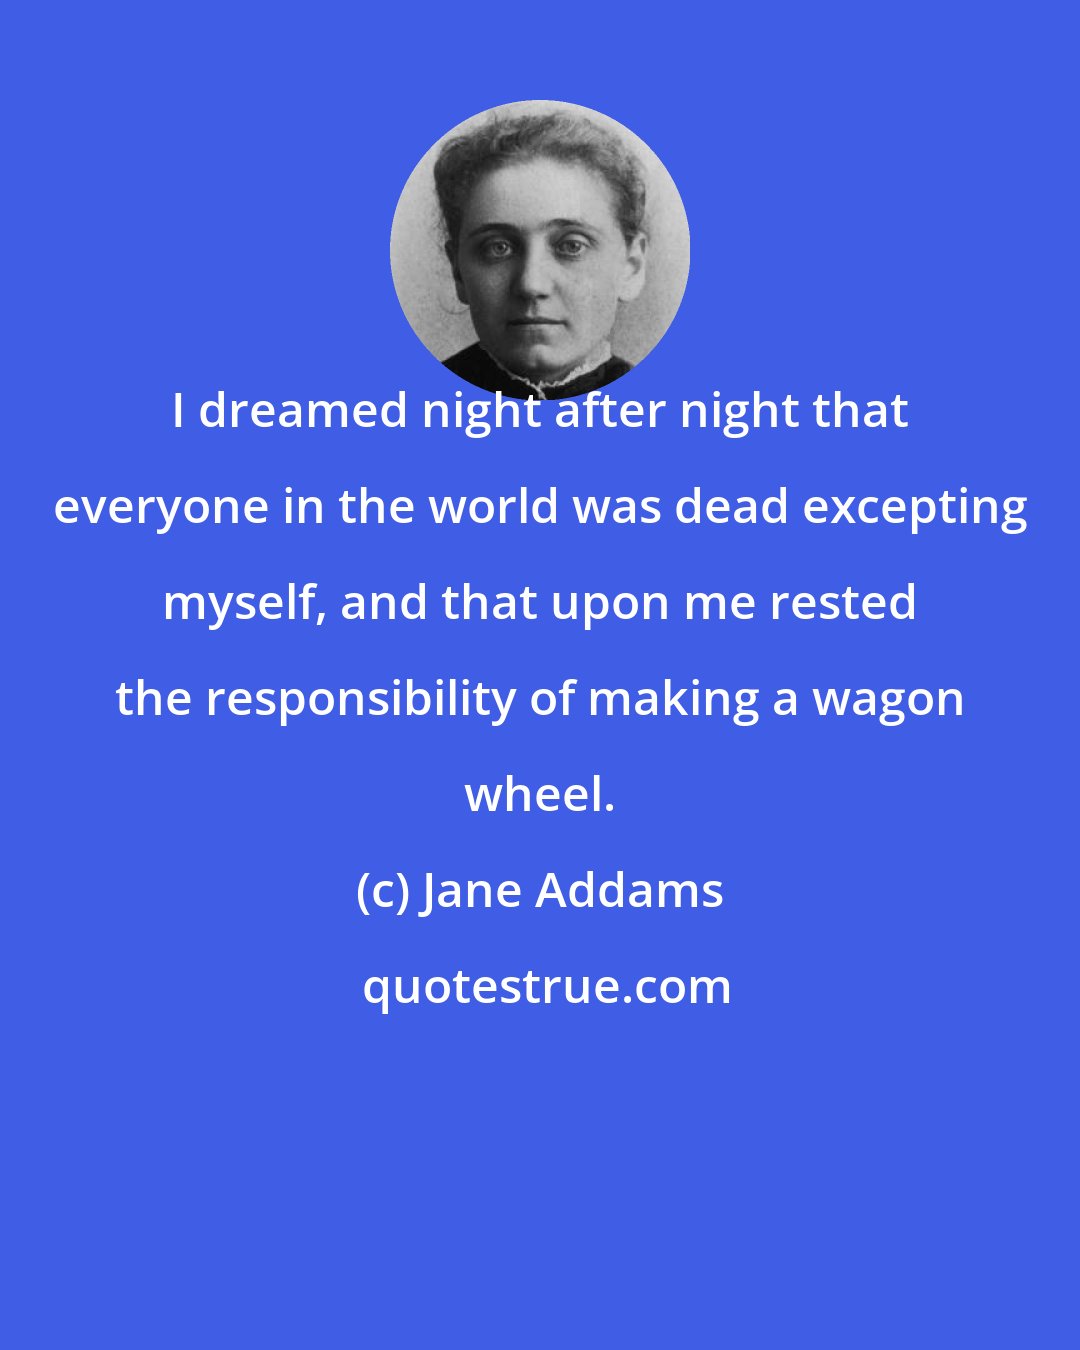 Jane Addams: I dreamed night after night that everyone in the world was dead excepting myself, and that upon me rested the responsibility of making a wagon wheel.